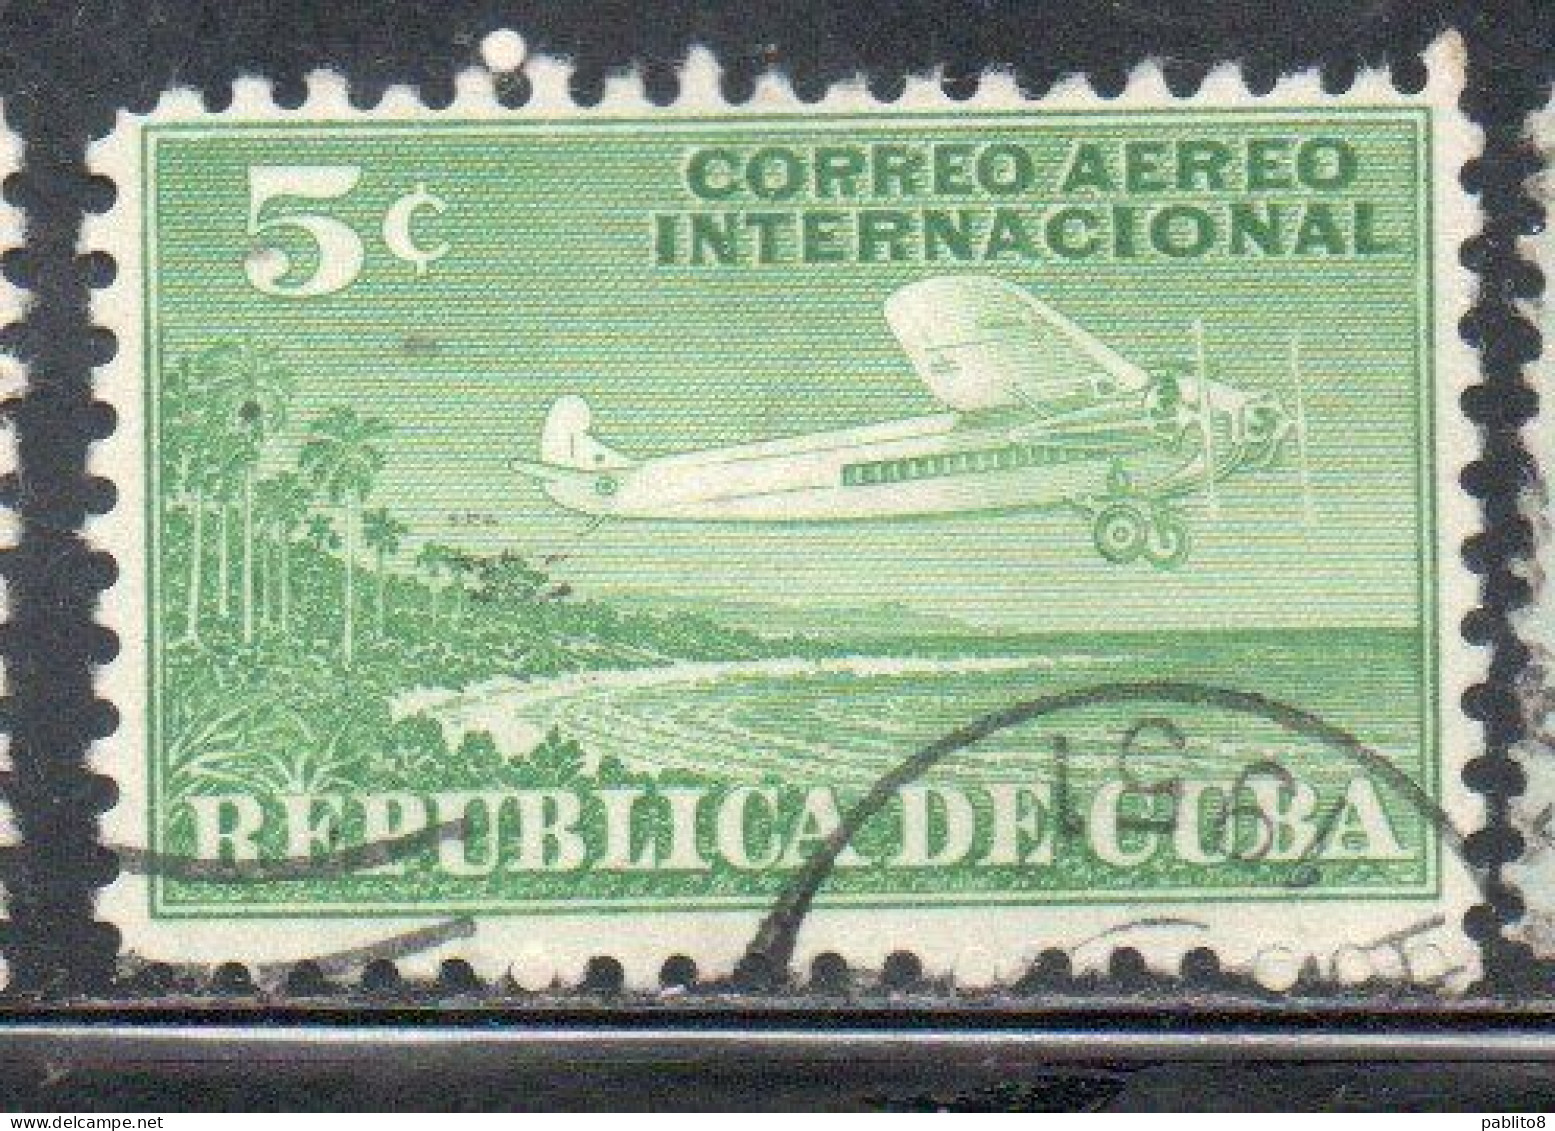 CUBA 1931 AIRMAIL AIR POST MAIL FOR FOREIGN POSTAGE PLANE AND COAST 5c USADO USED USATO OBLITERE' - Posta Aerea